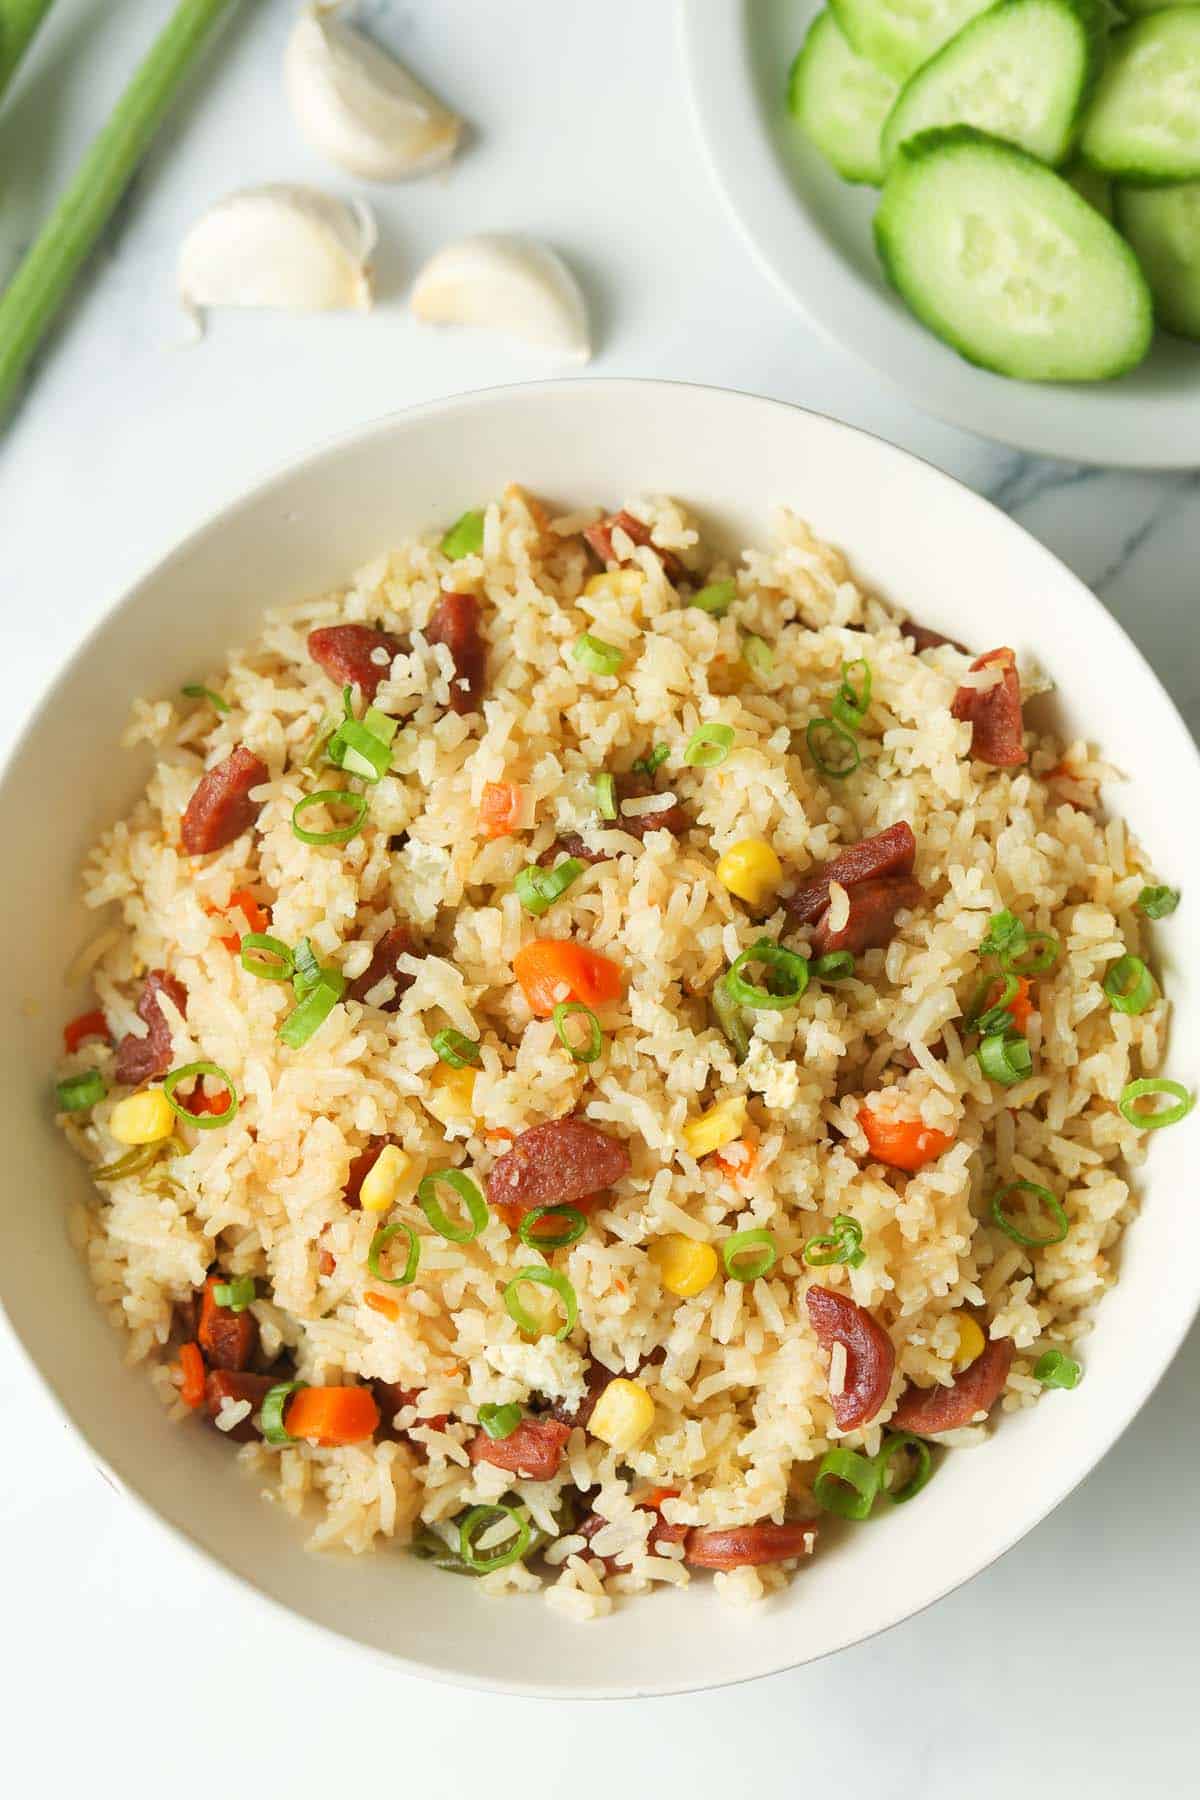 Bowl of fried rice with eggs, vegetables and sausage.